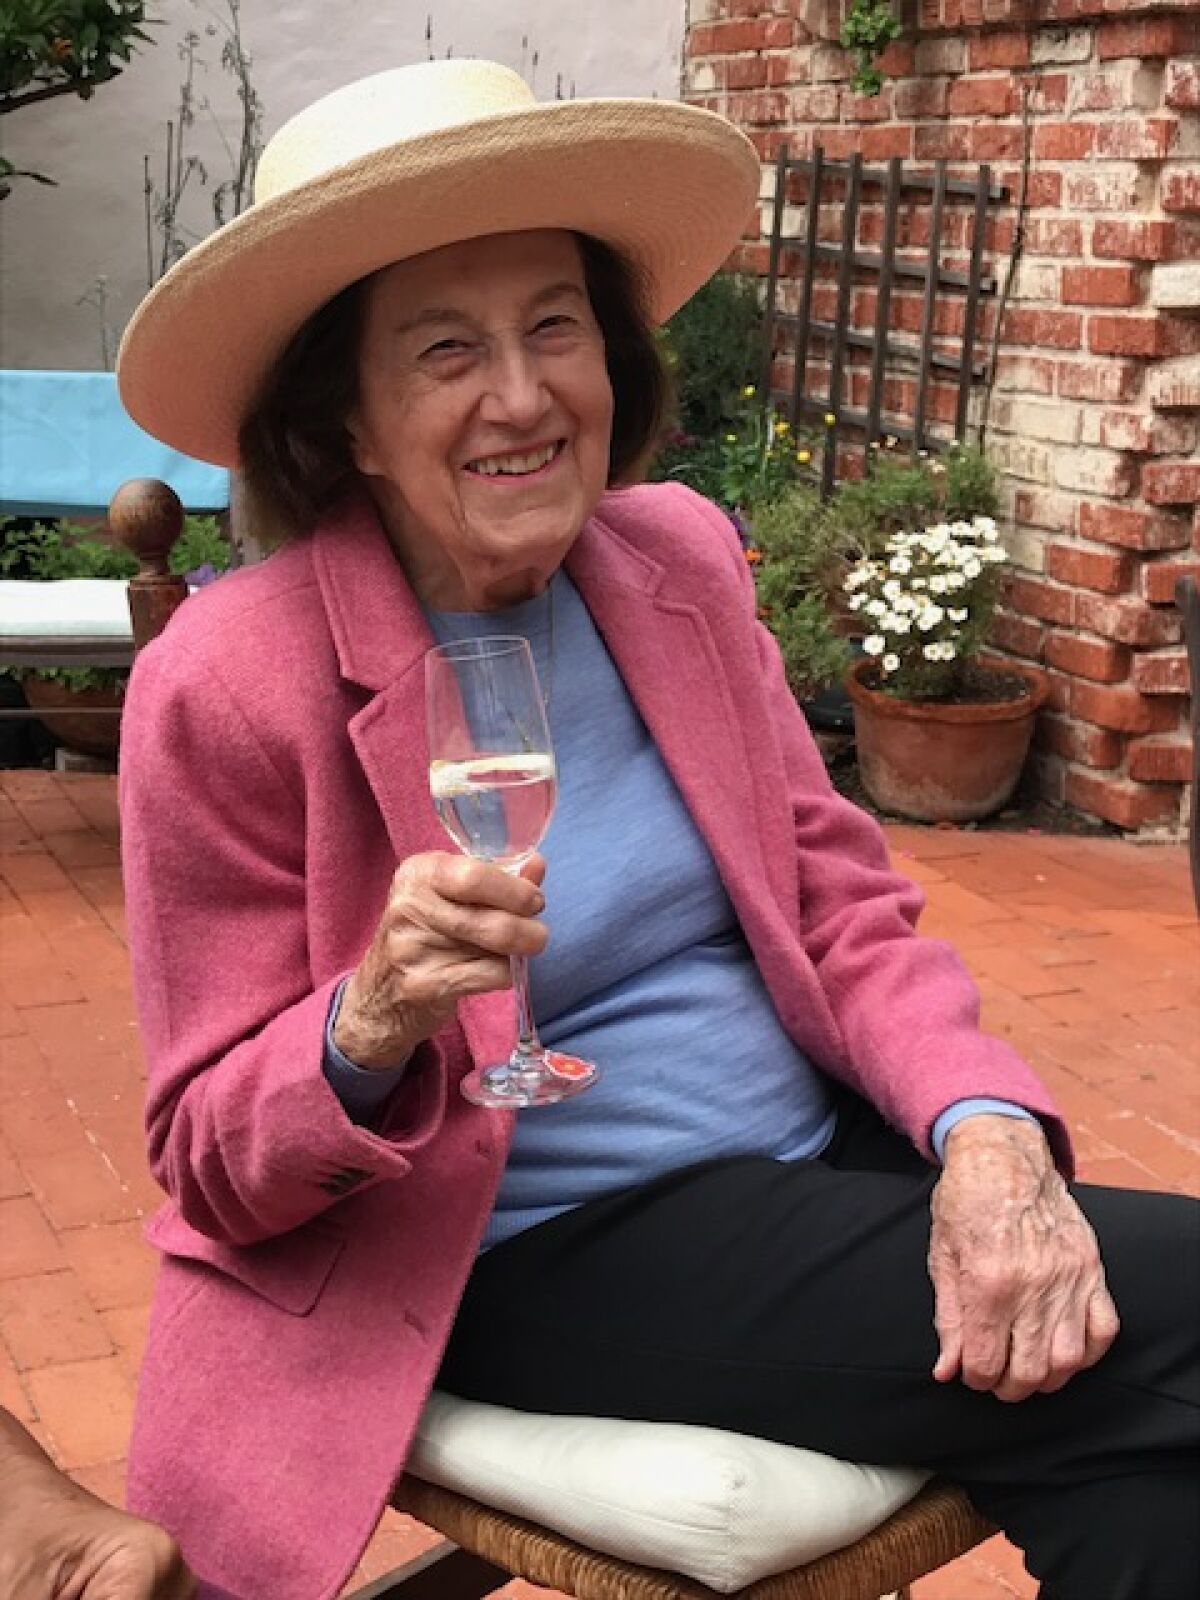 Lucienne Guillemin, who turns 100 on Feb. 18, enjoys wine daily with her husband at their home in La Jolla.